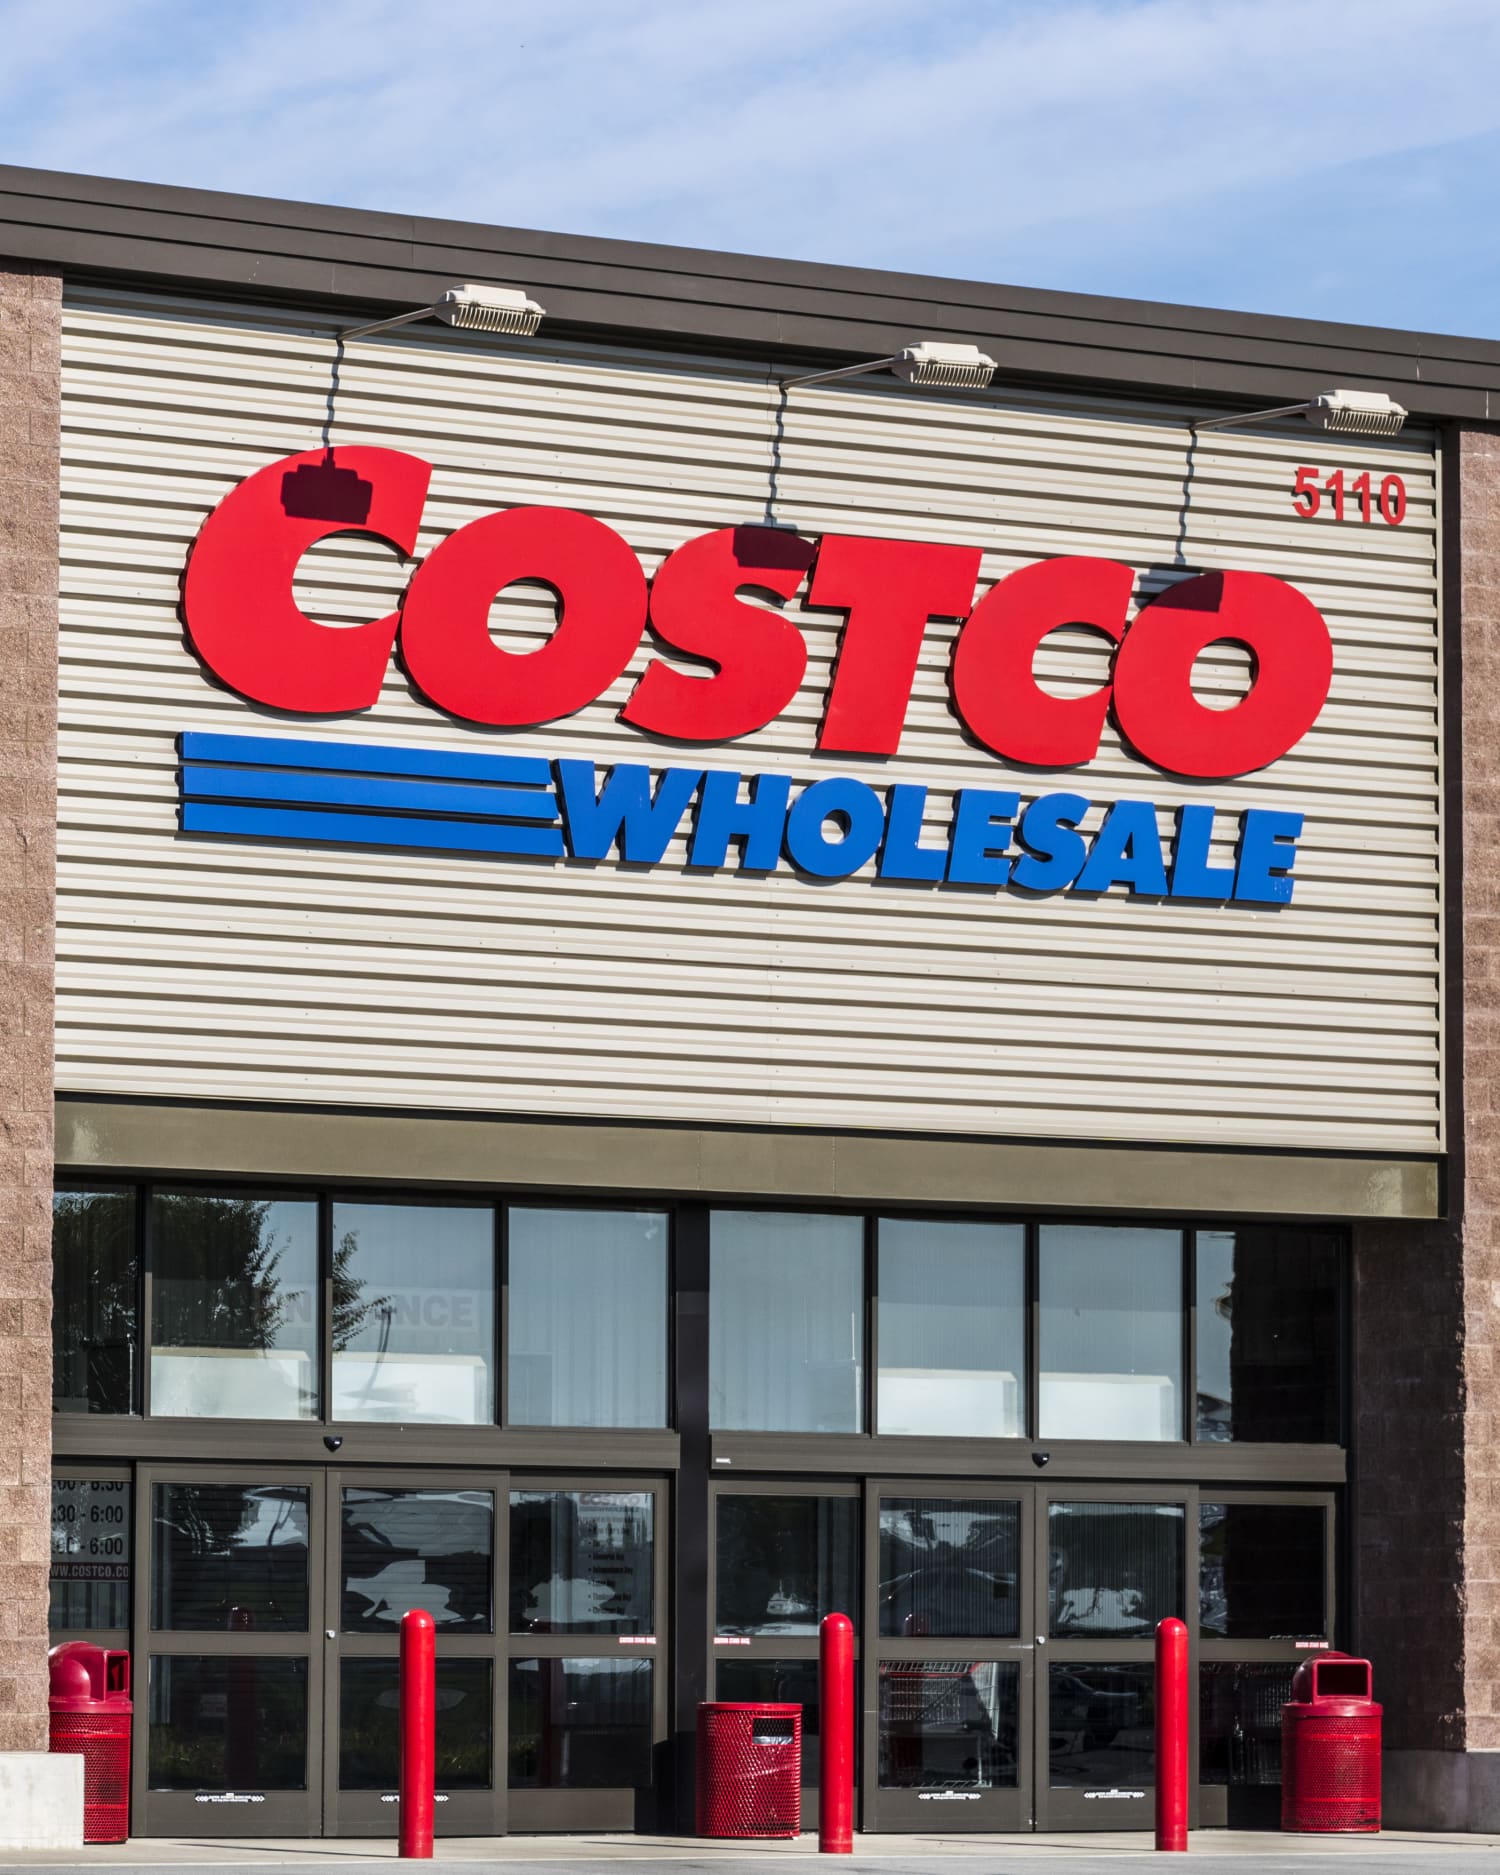 Costco Is Selling a New Raspberry-Lemon-Flavored Cake, and Shoppers Are Rushing to Try It